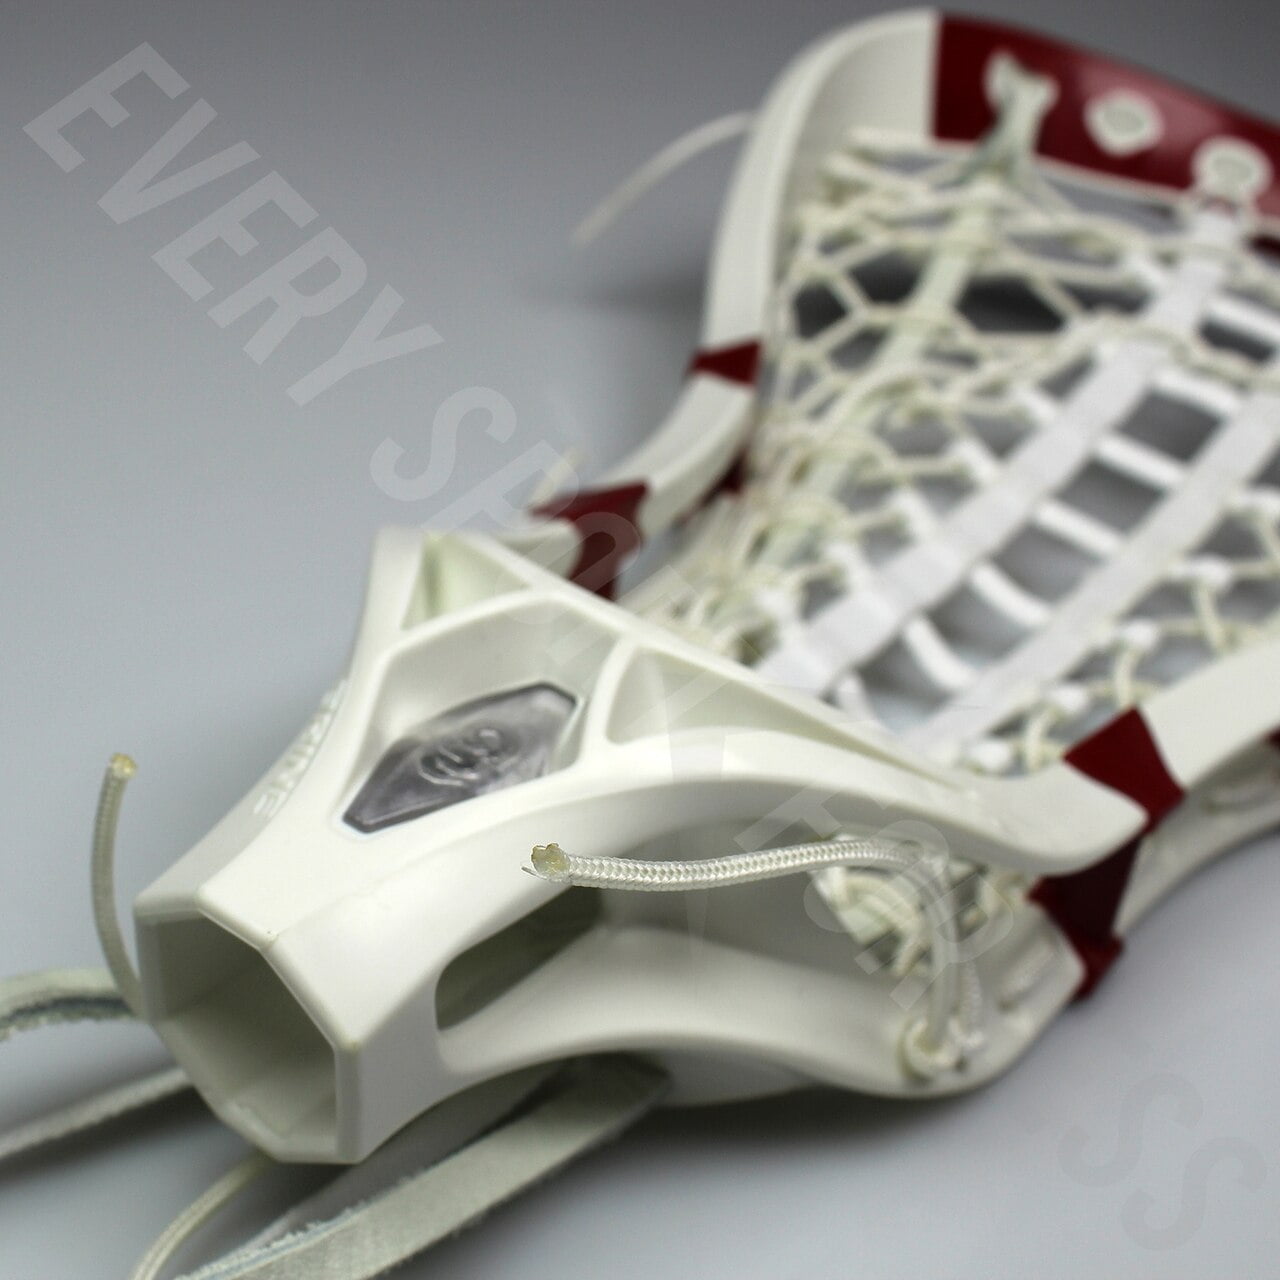 NEW Brine A2 Girls Strung Lacrosse Head White and Red Lists @ $115 